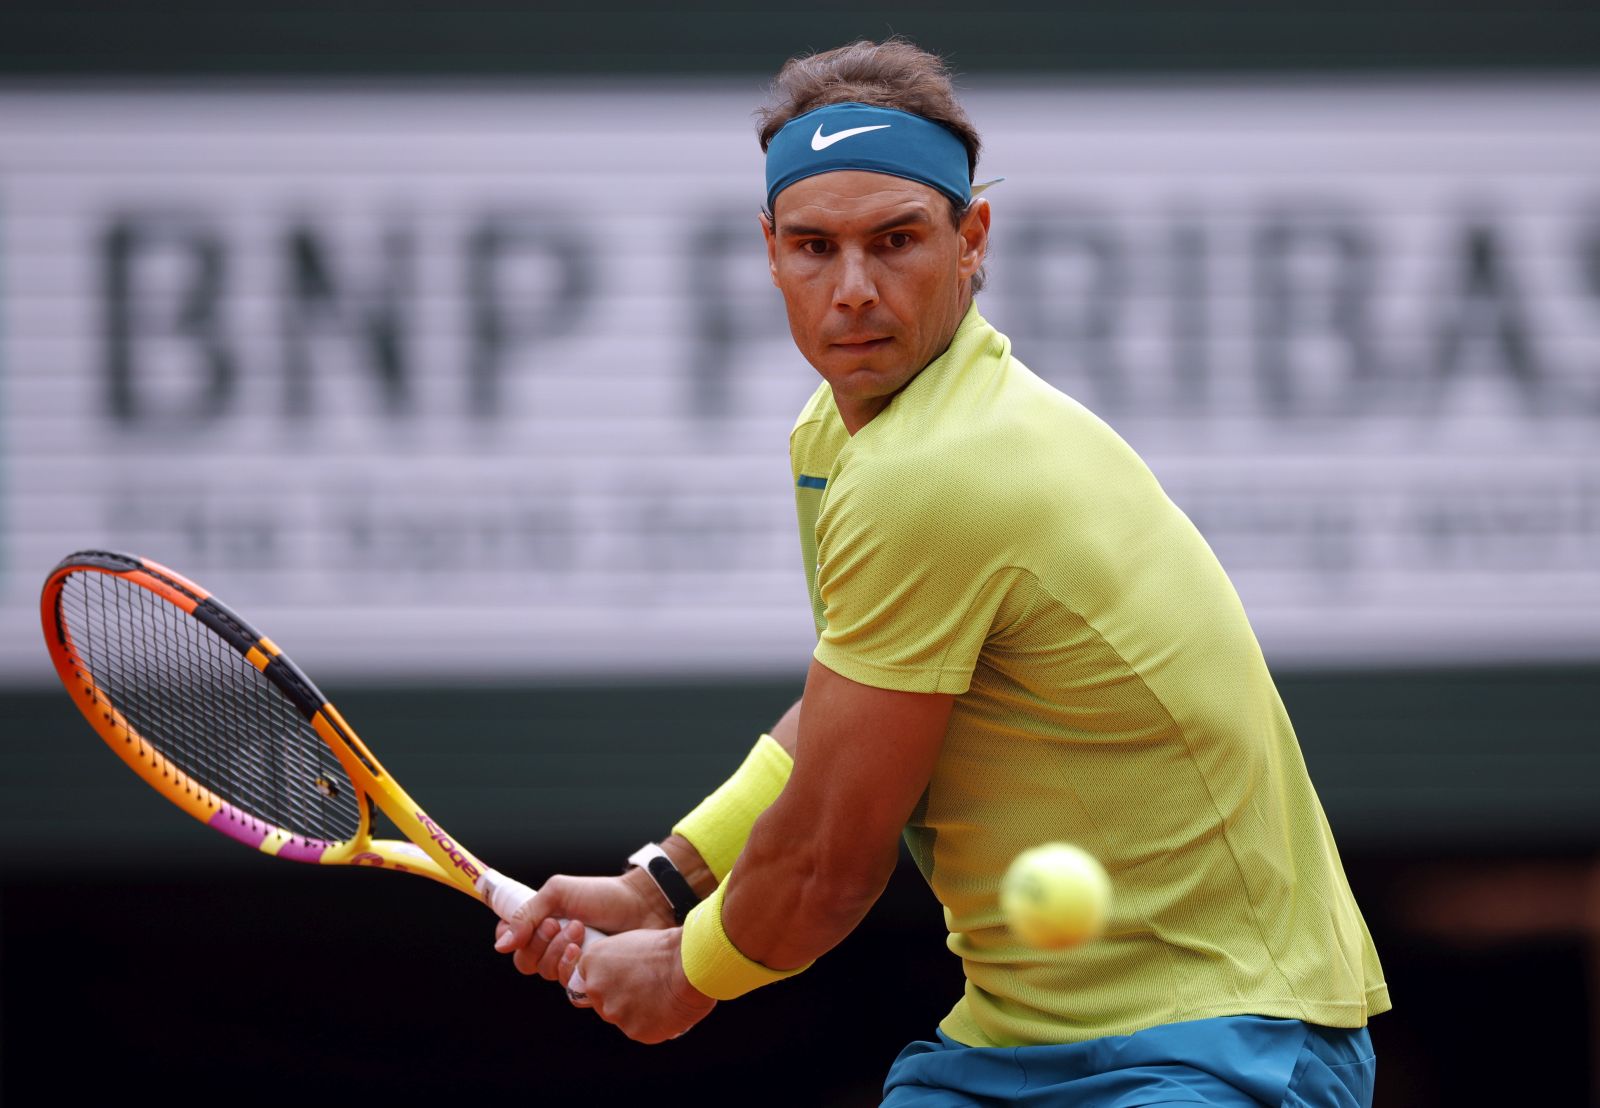 epa09984308 Rafael Nadal of Spain plays Felix Auger-Aliassime of Canada in their men’s fourth round match during the French Open tennis tournament at Roland ​Garros in Paris, France, 29 May 2022.  EPA/YOAN VALAT